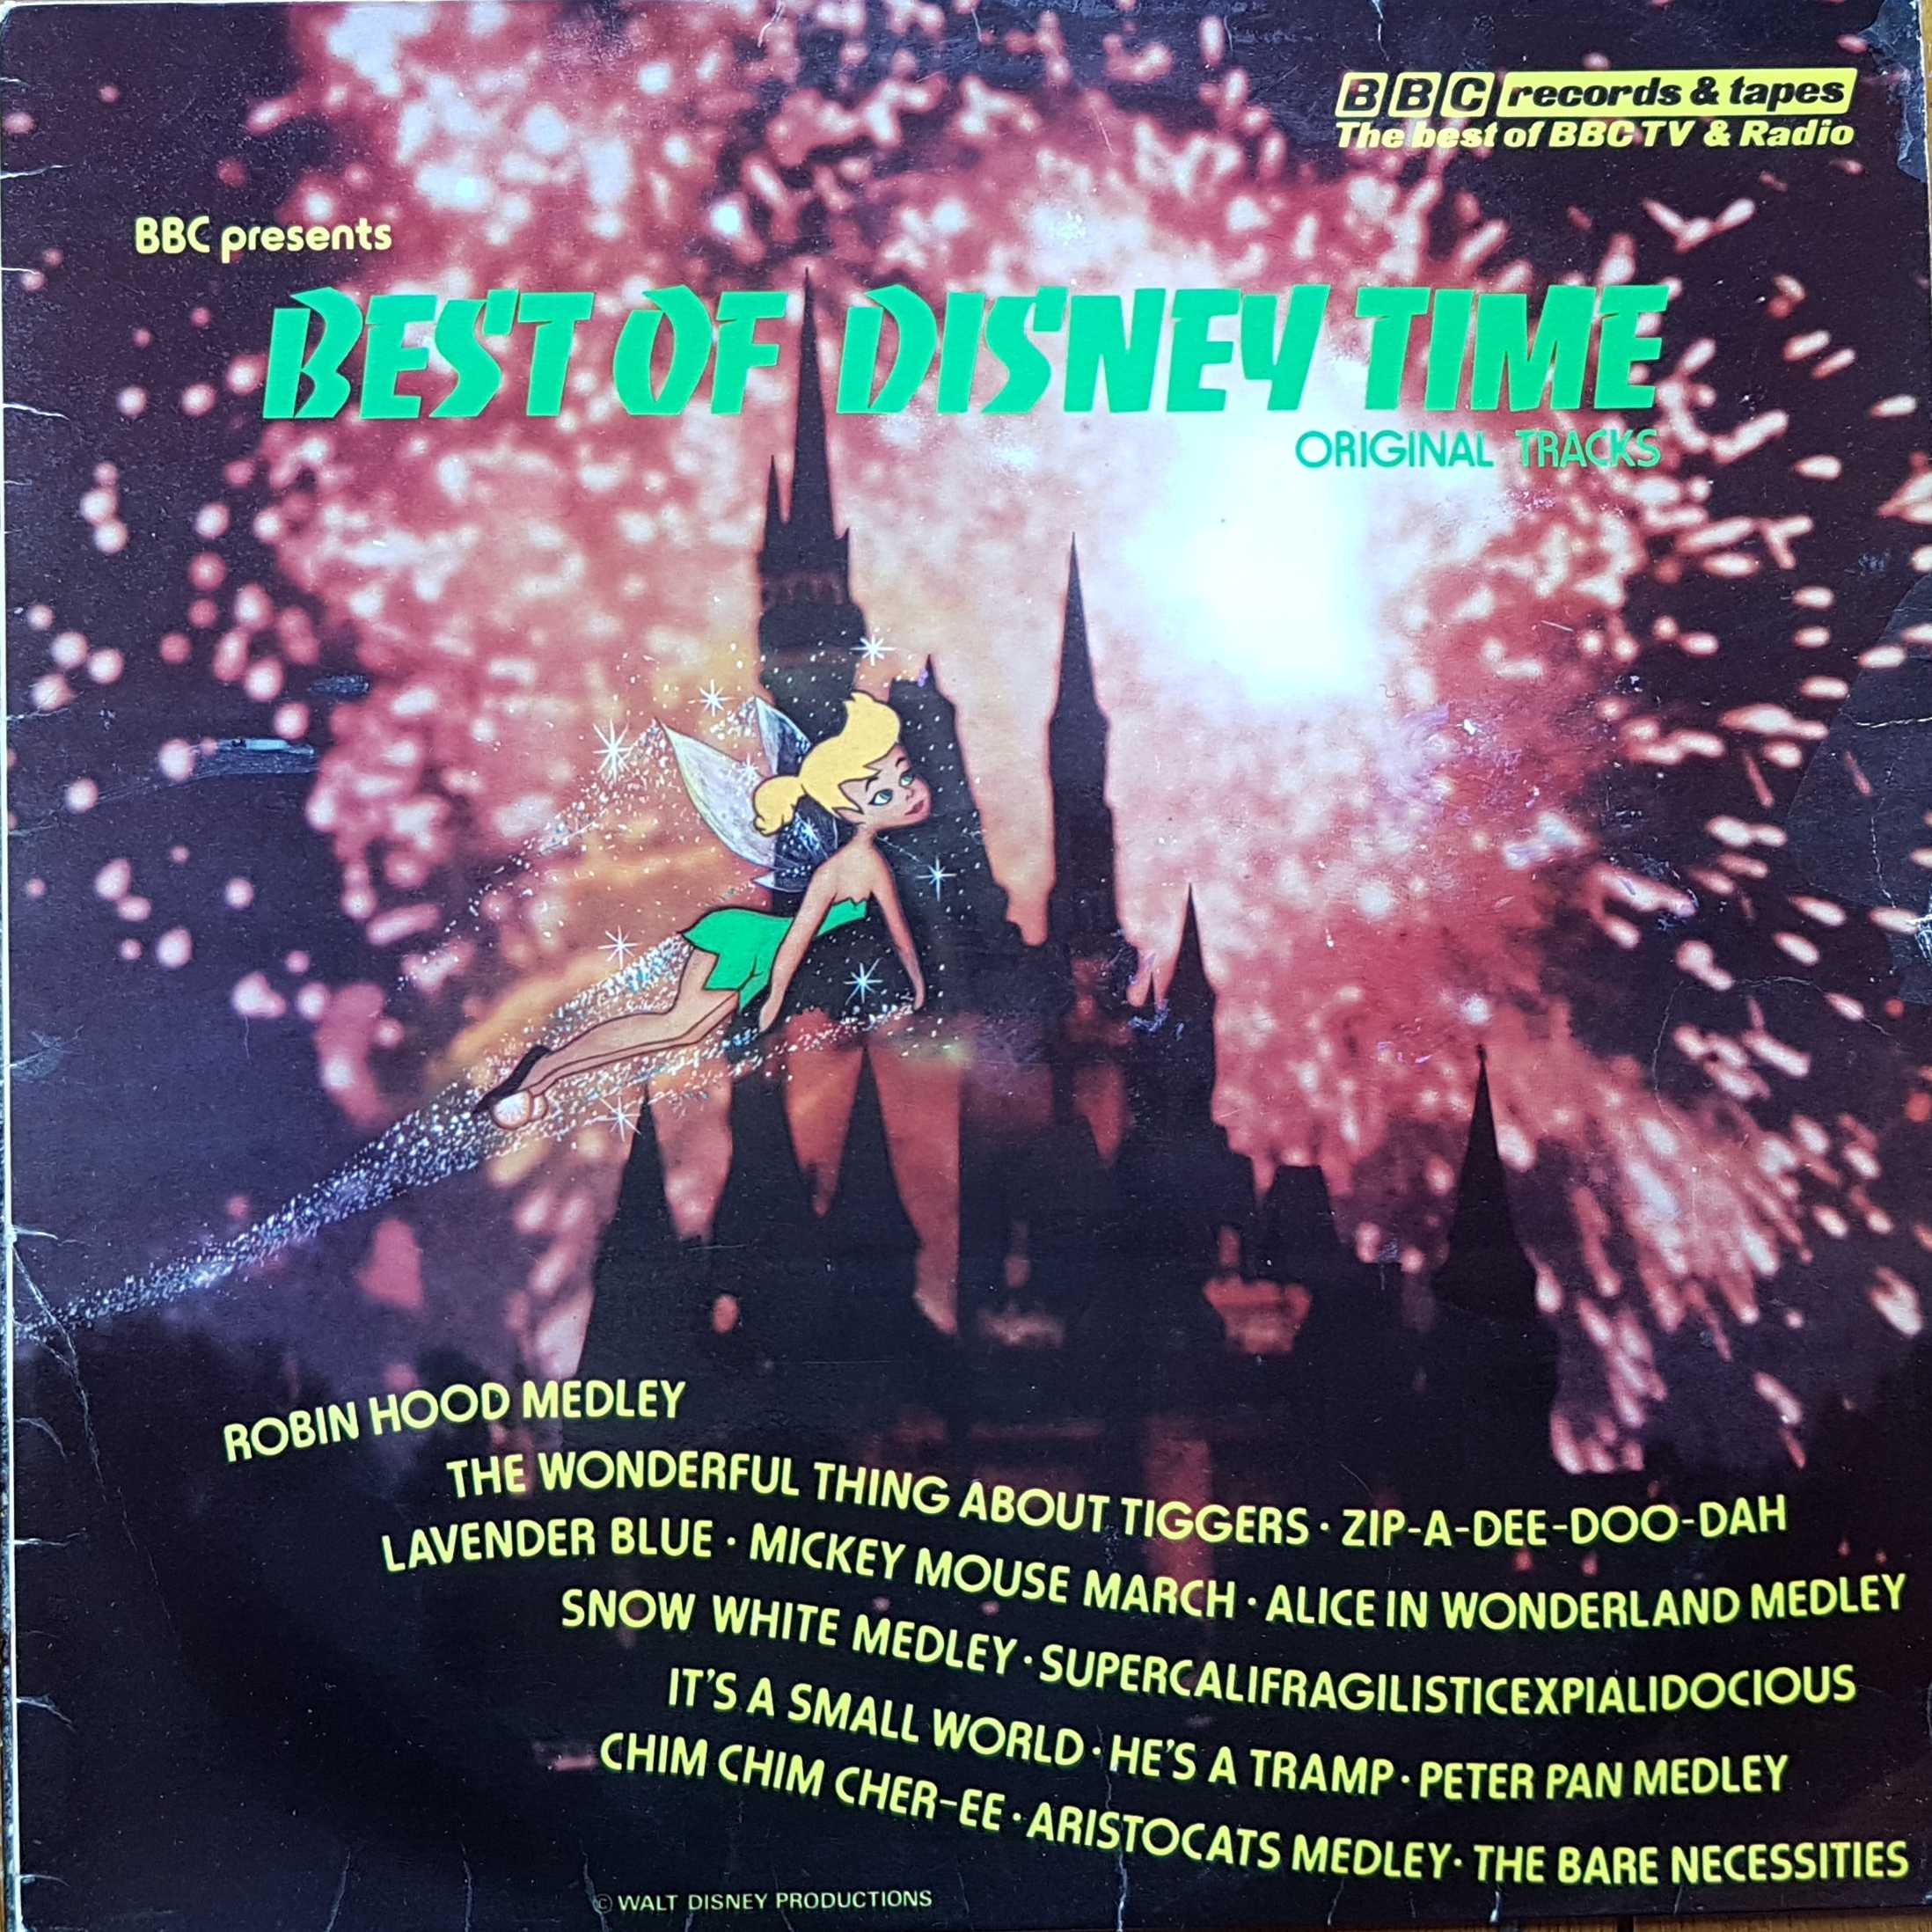 Picture of REB 217 BBC Presents - Best of Disney Time by artist Various from the BBC albums - Records and Tapes library